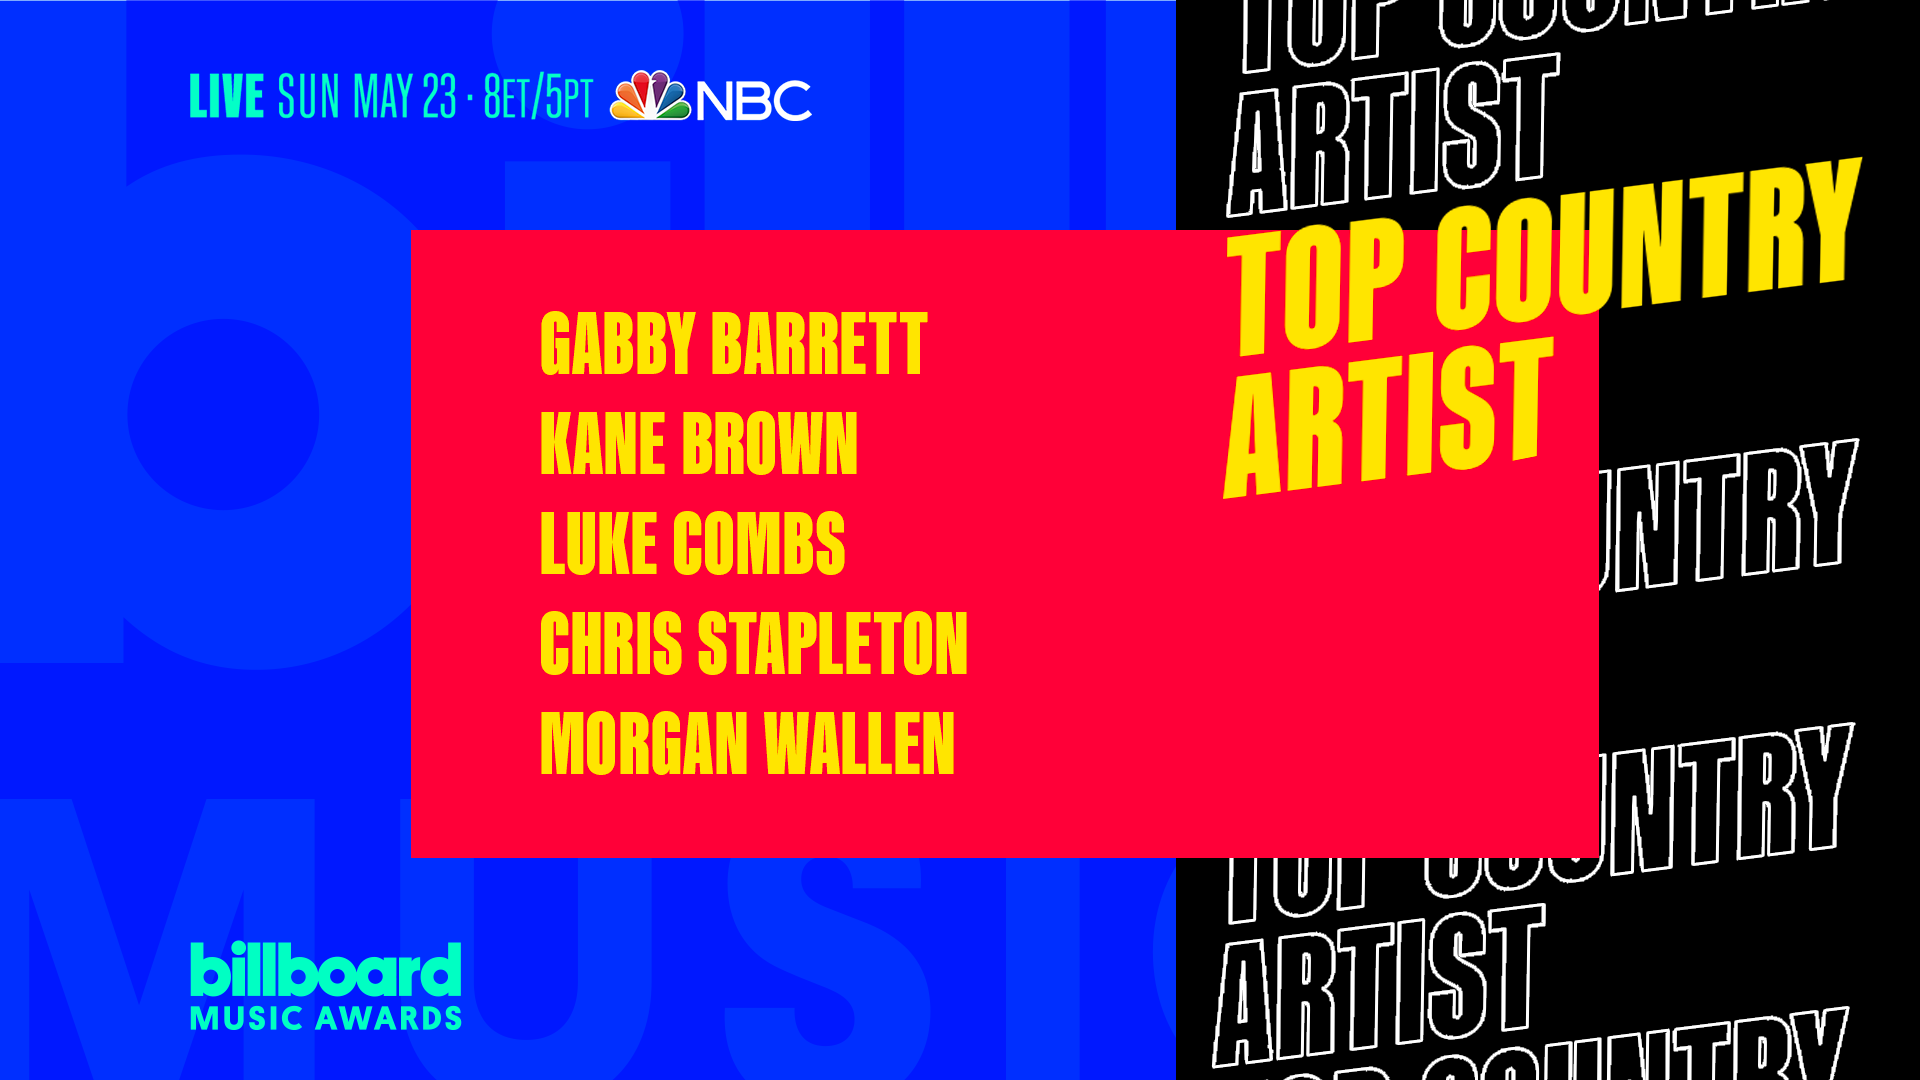 Gabby Barrett is nominated for Top Country Artist at the 2021 Billboard Music Awards.
